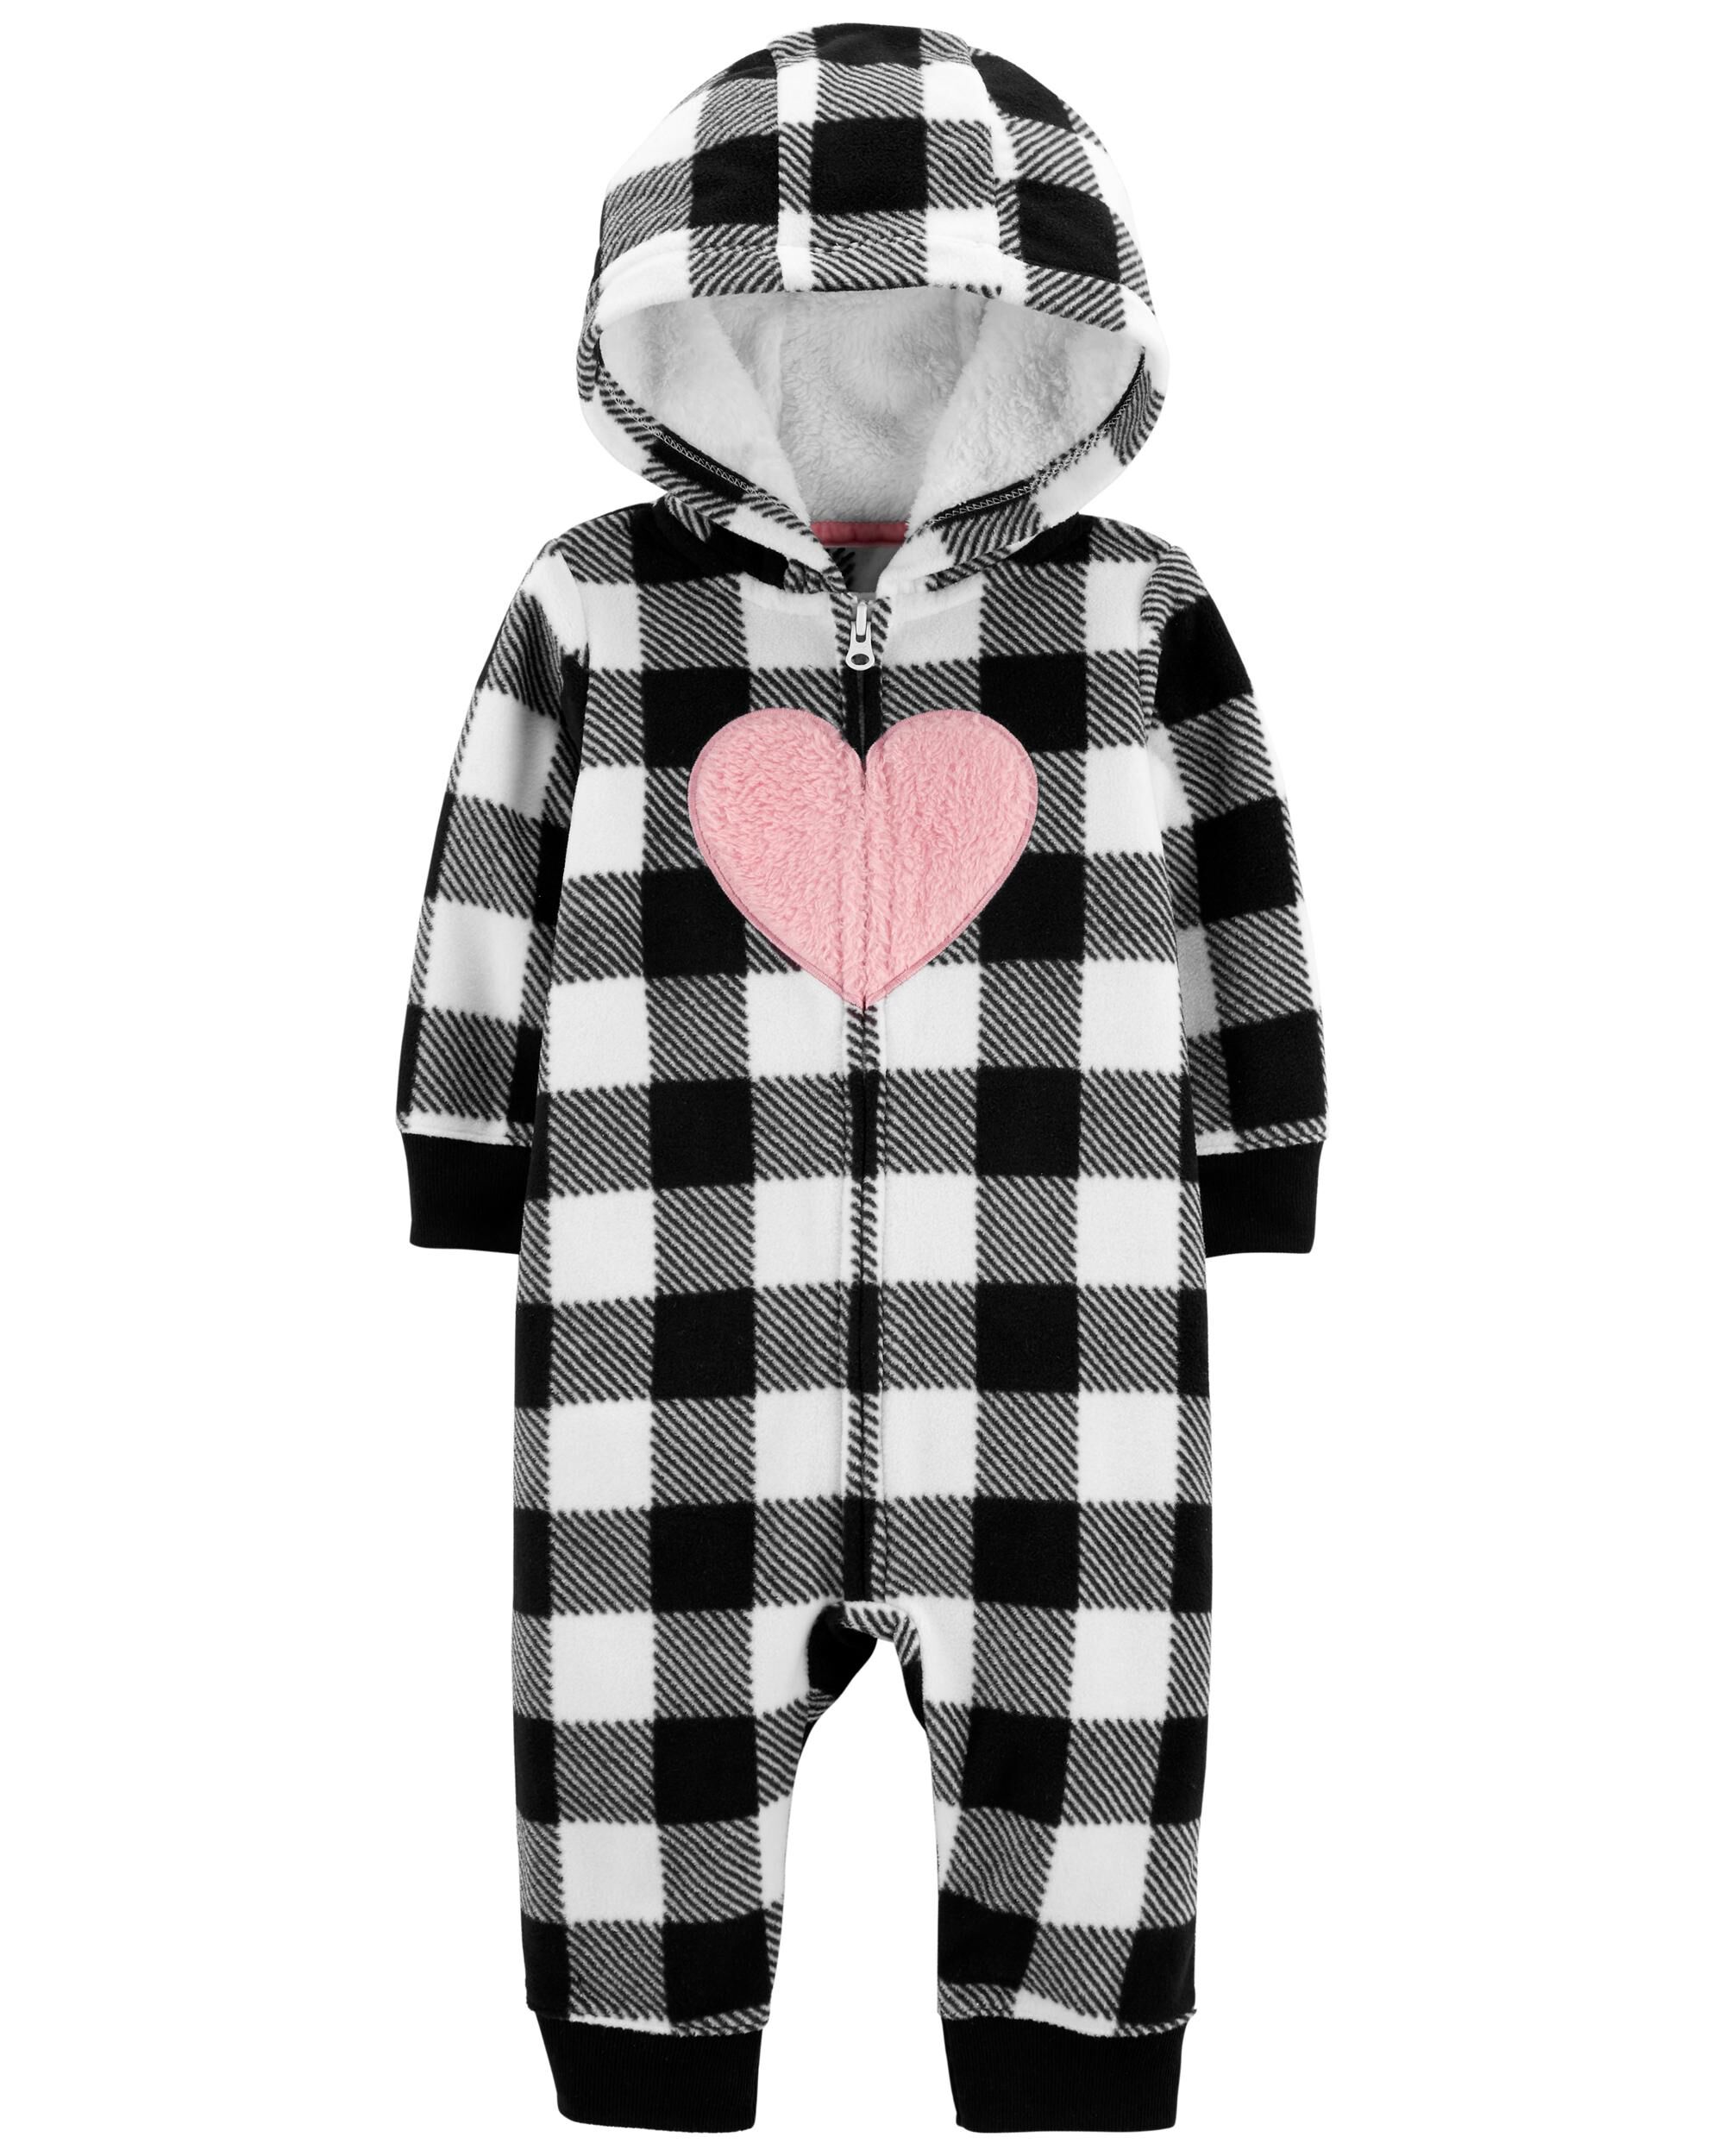 carters baby girl jumpsuit